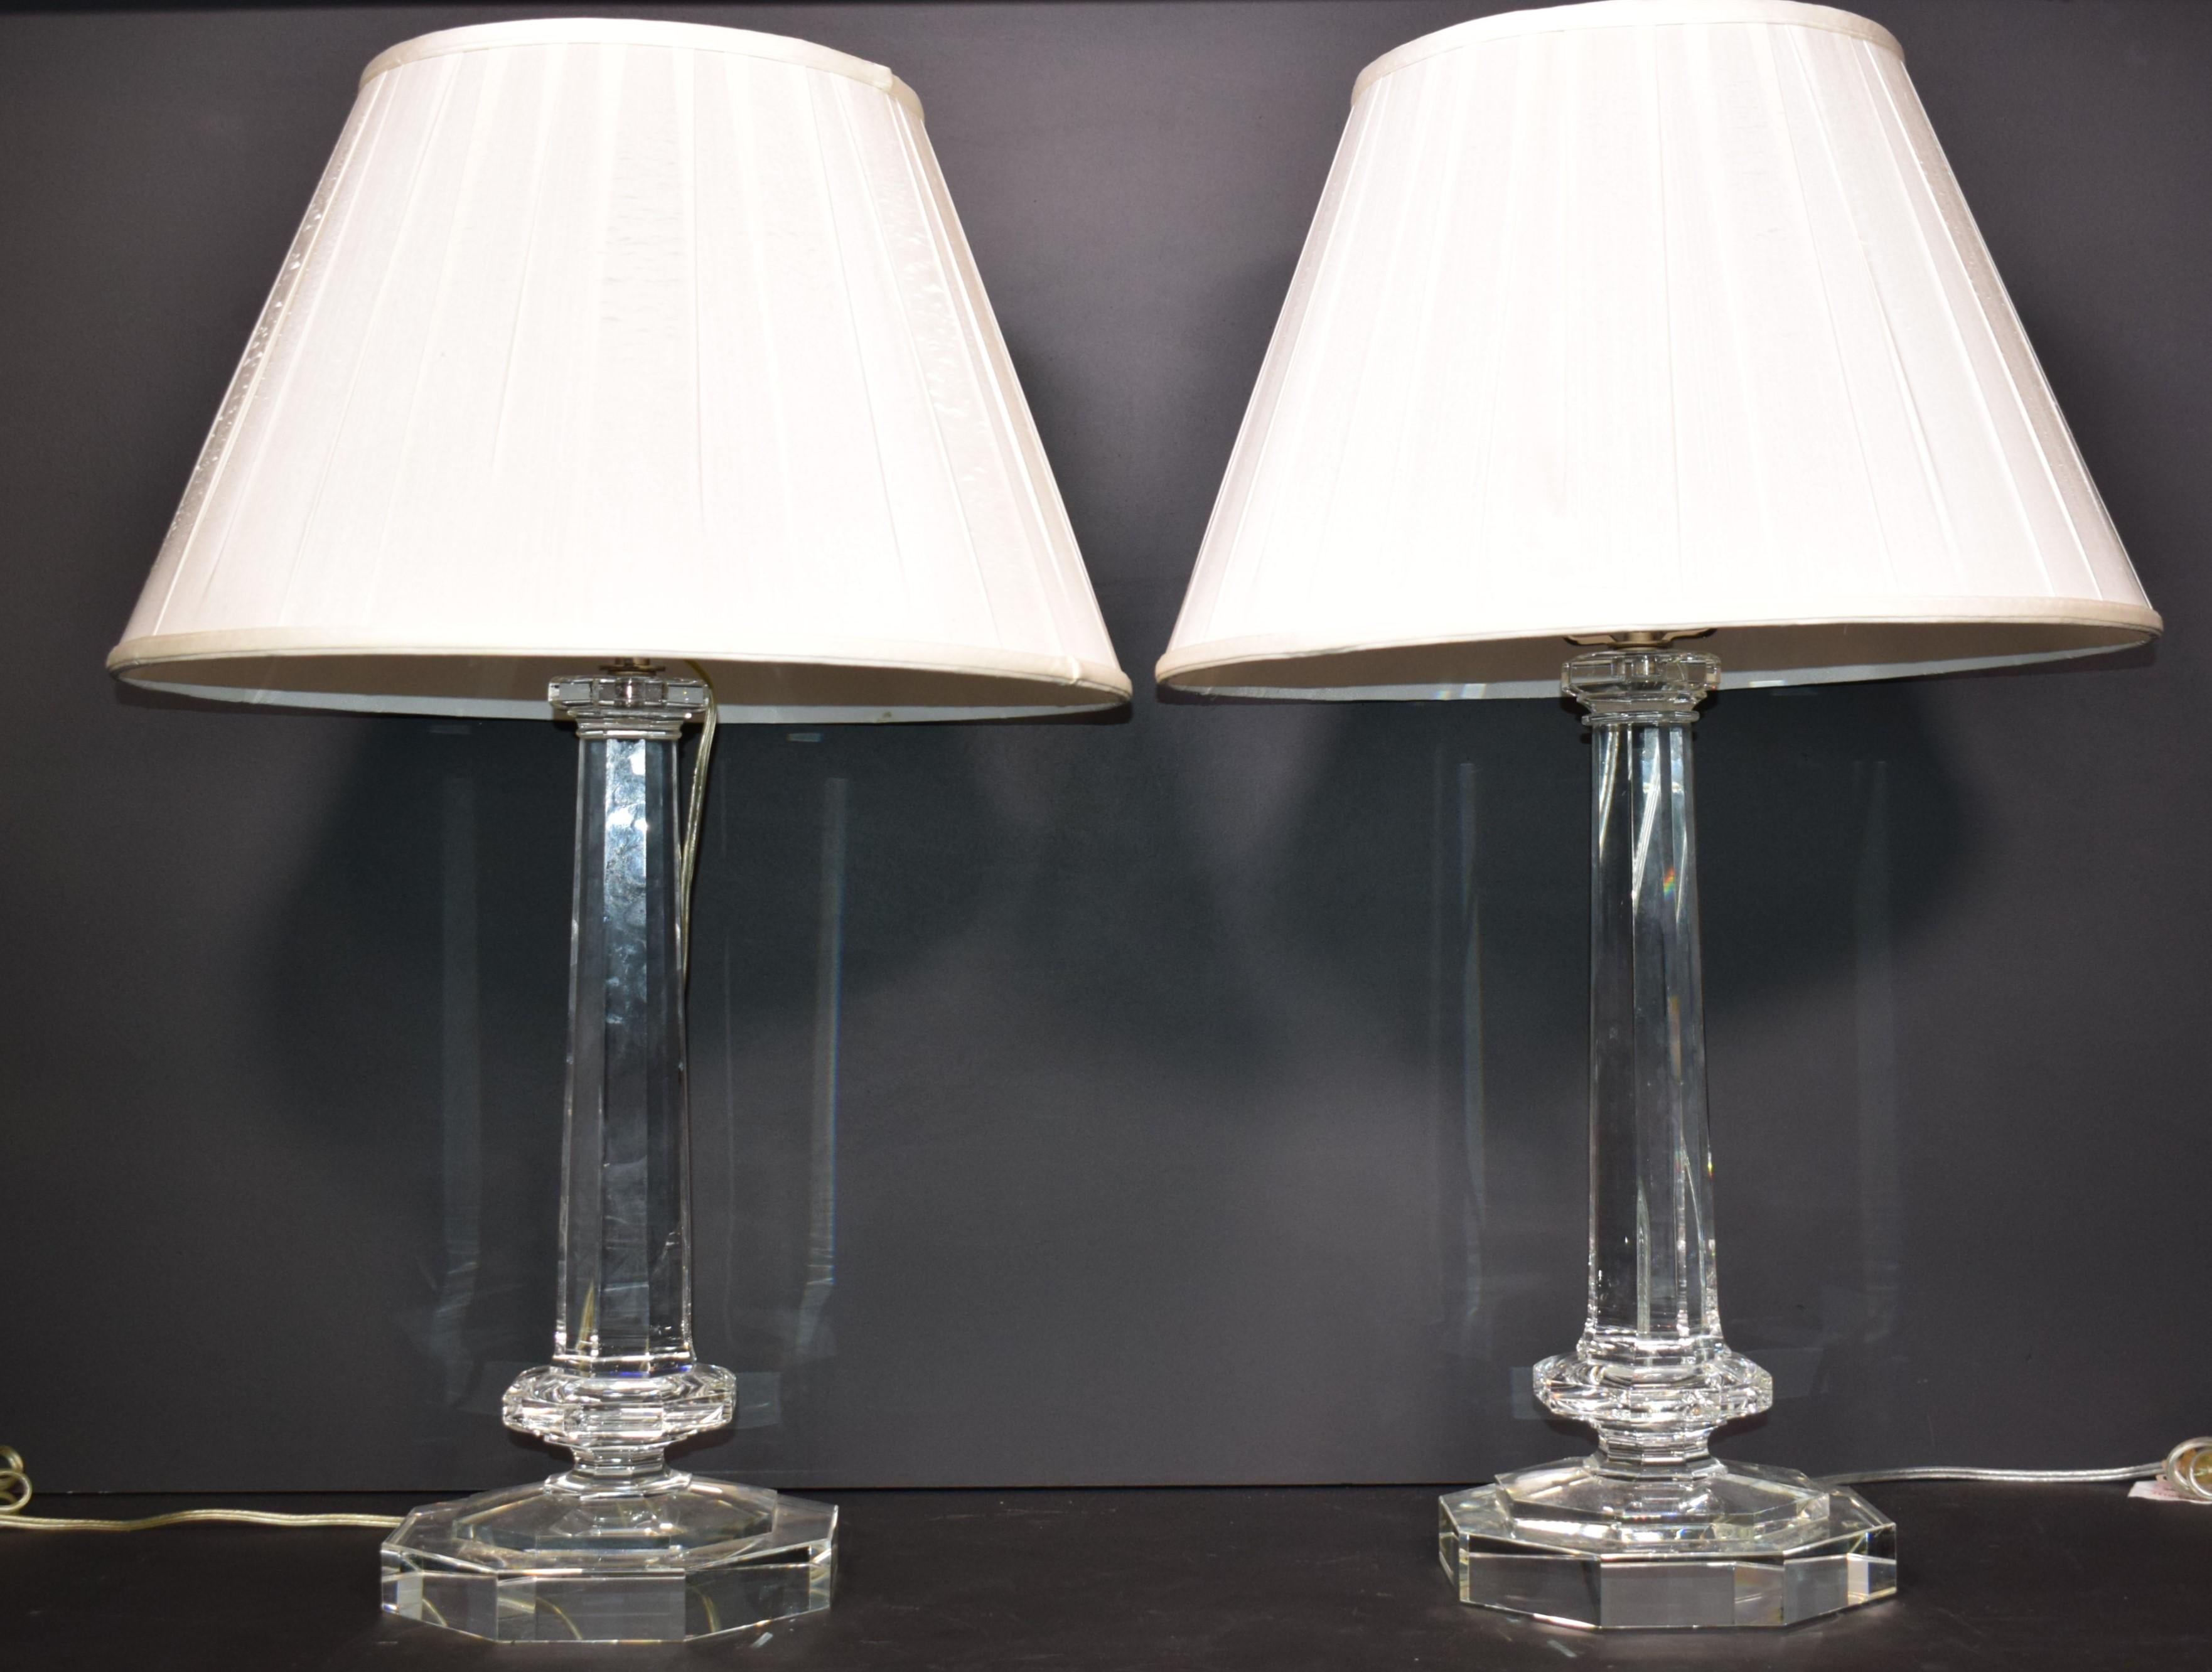 A very fine pair of hand cut crystal lamp bases (different tops, see photo). Exquisite Detail. Fitted with a pair of shades ( fabric to be replaced).
France, circa 1980.
Height without shades 23 1/